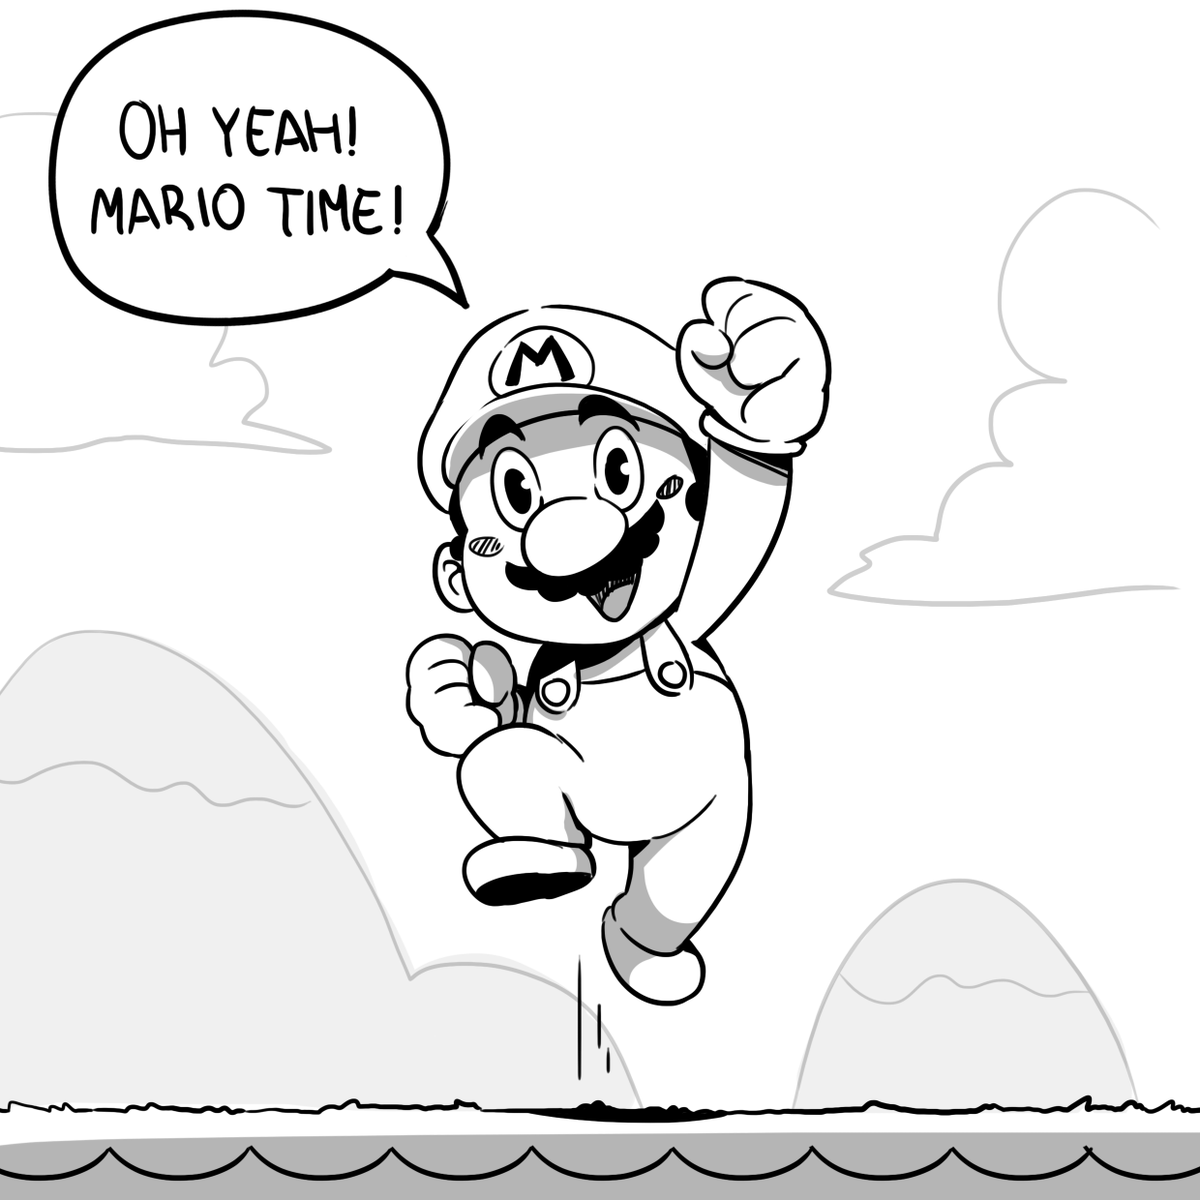 I've been watching New Super Mario Bros U speedruns before going to sleep and the phrase "Oh yeah, Mario time"  has been stuck in my brain 